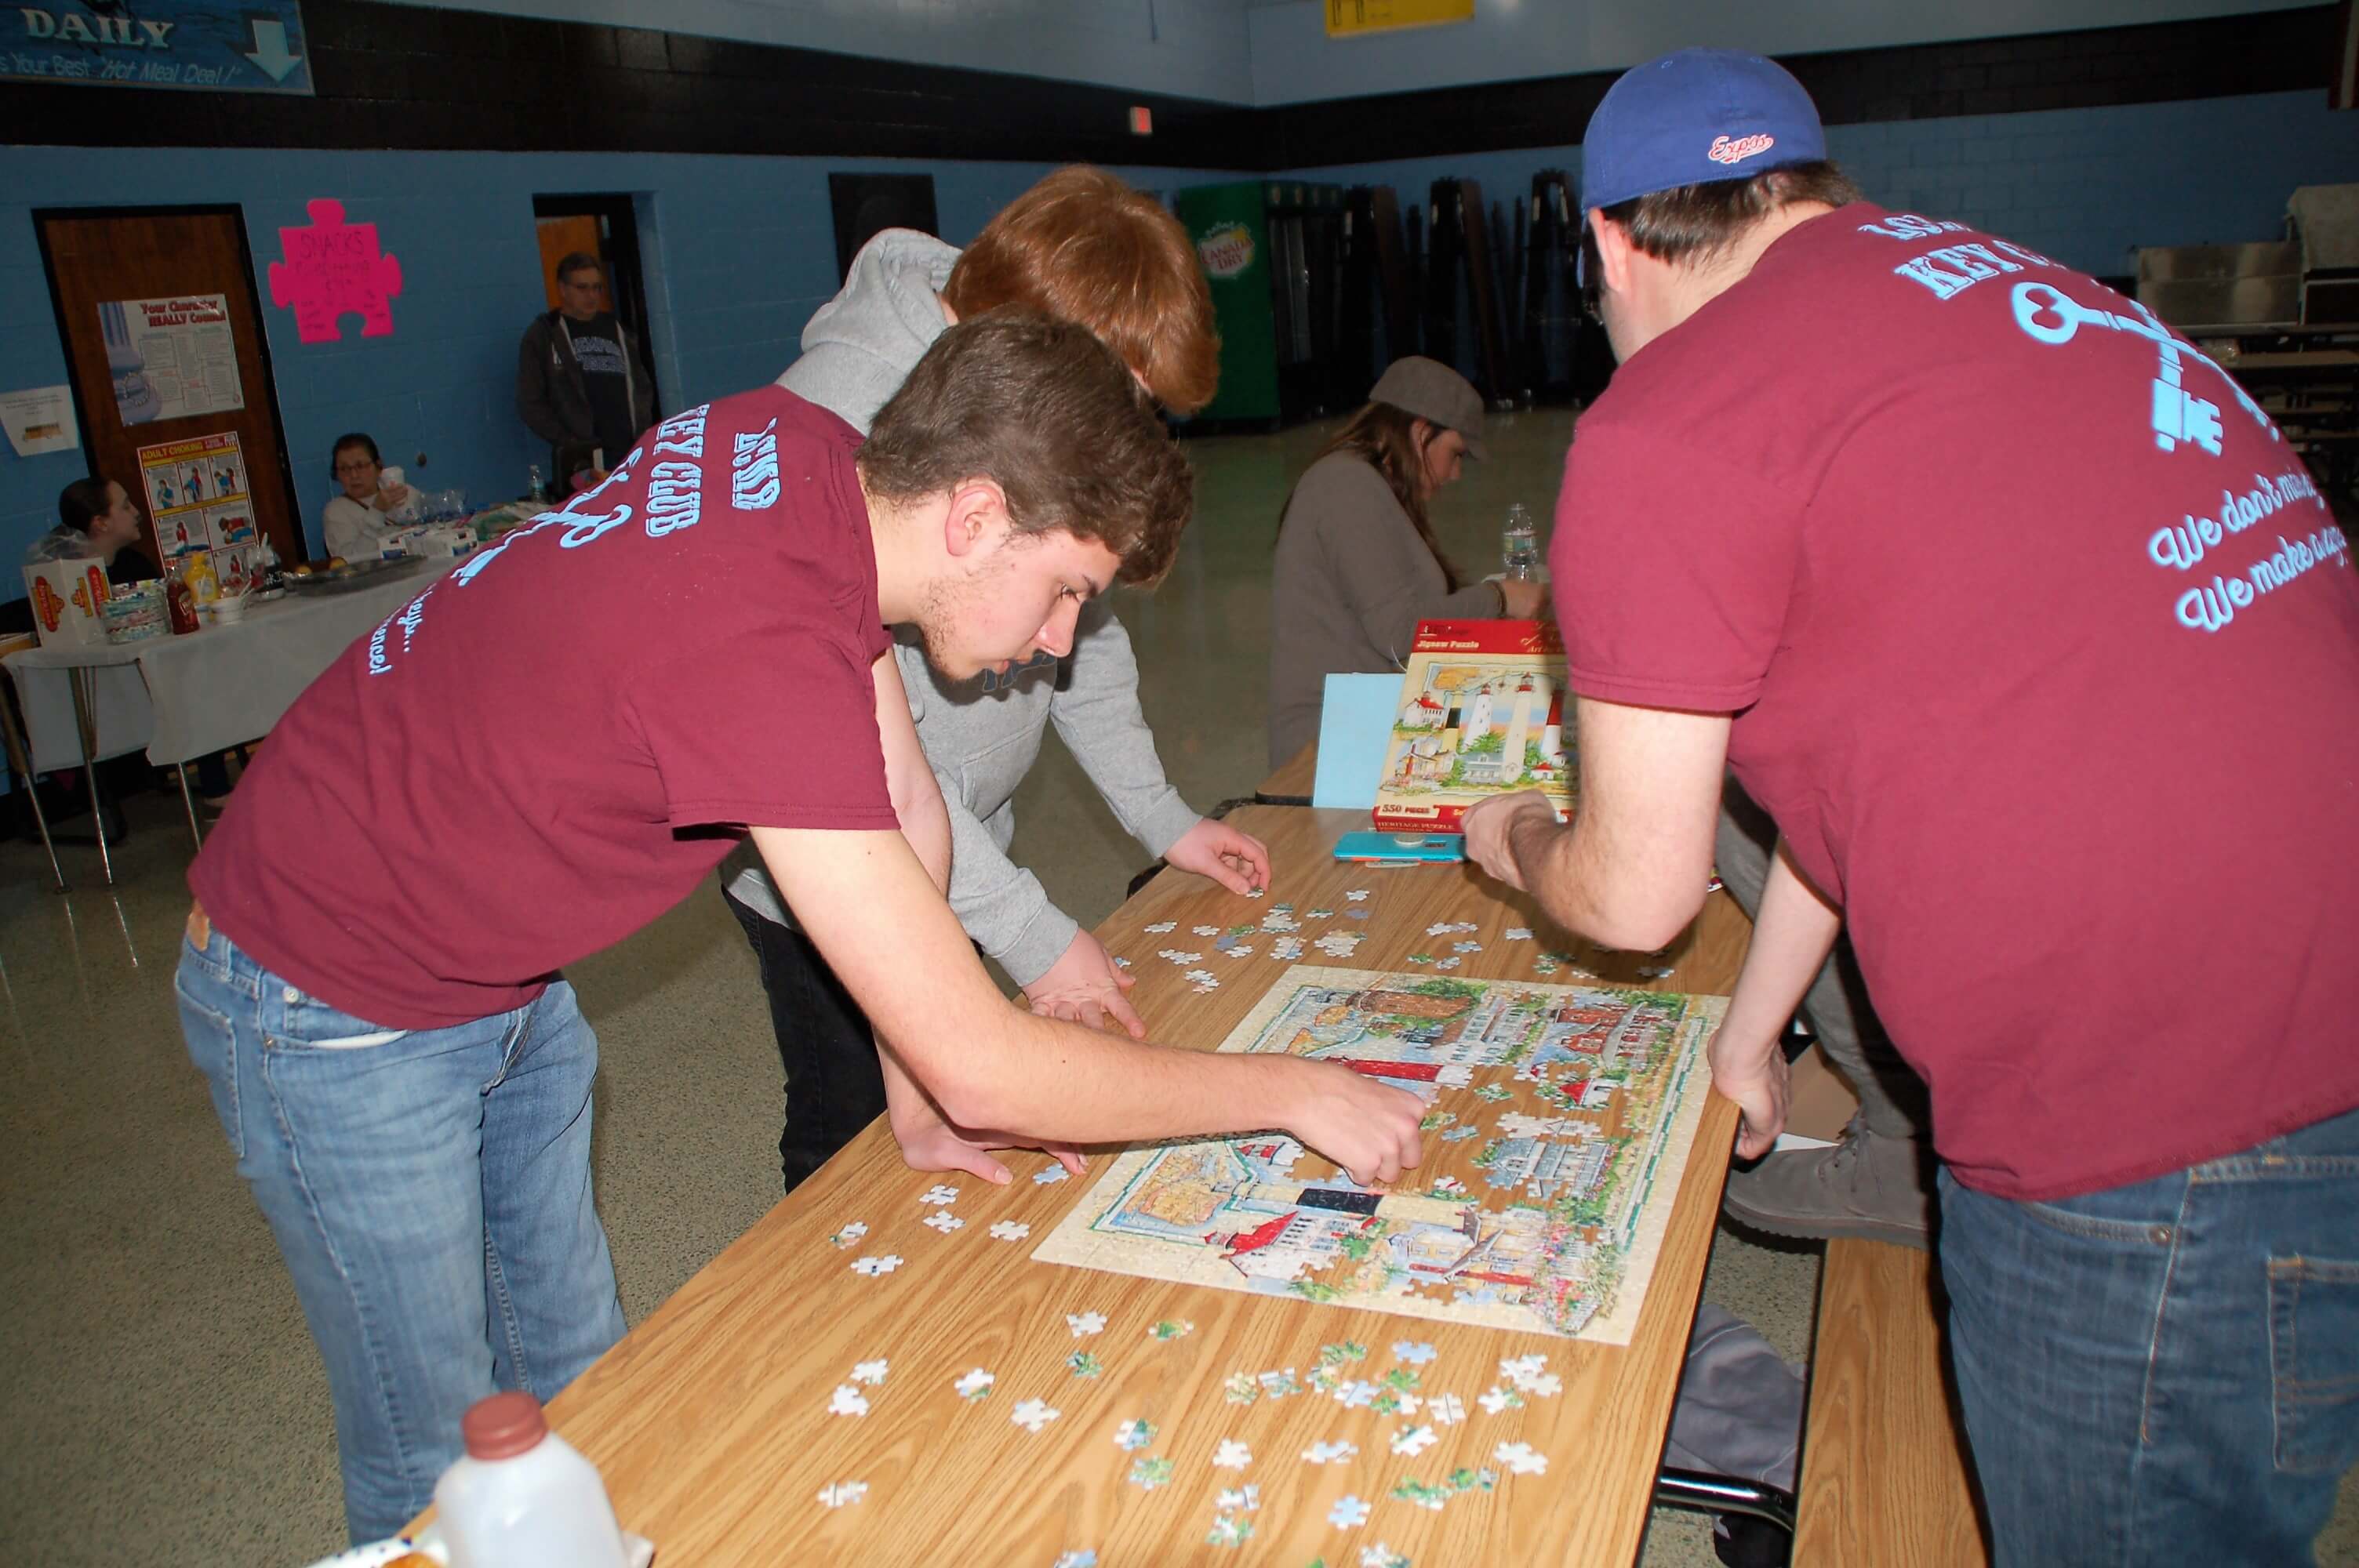 Puzzlers piece the shapes during the first jigsaw puzzle tournament at Richard M. Teitelman School.